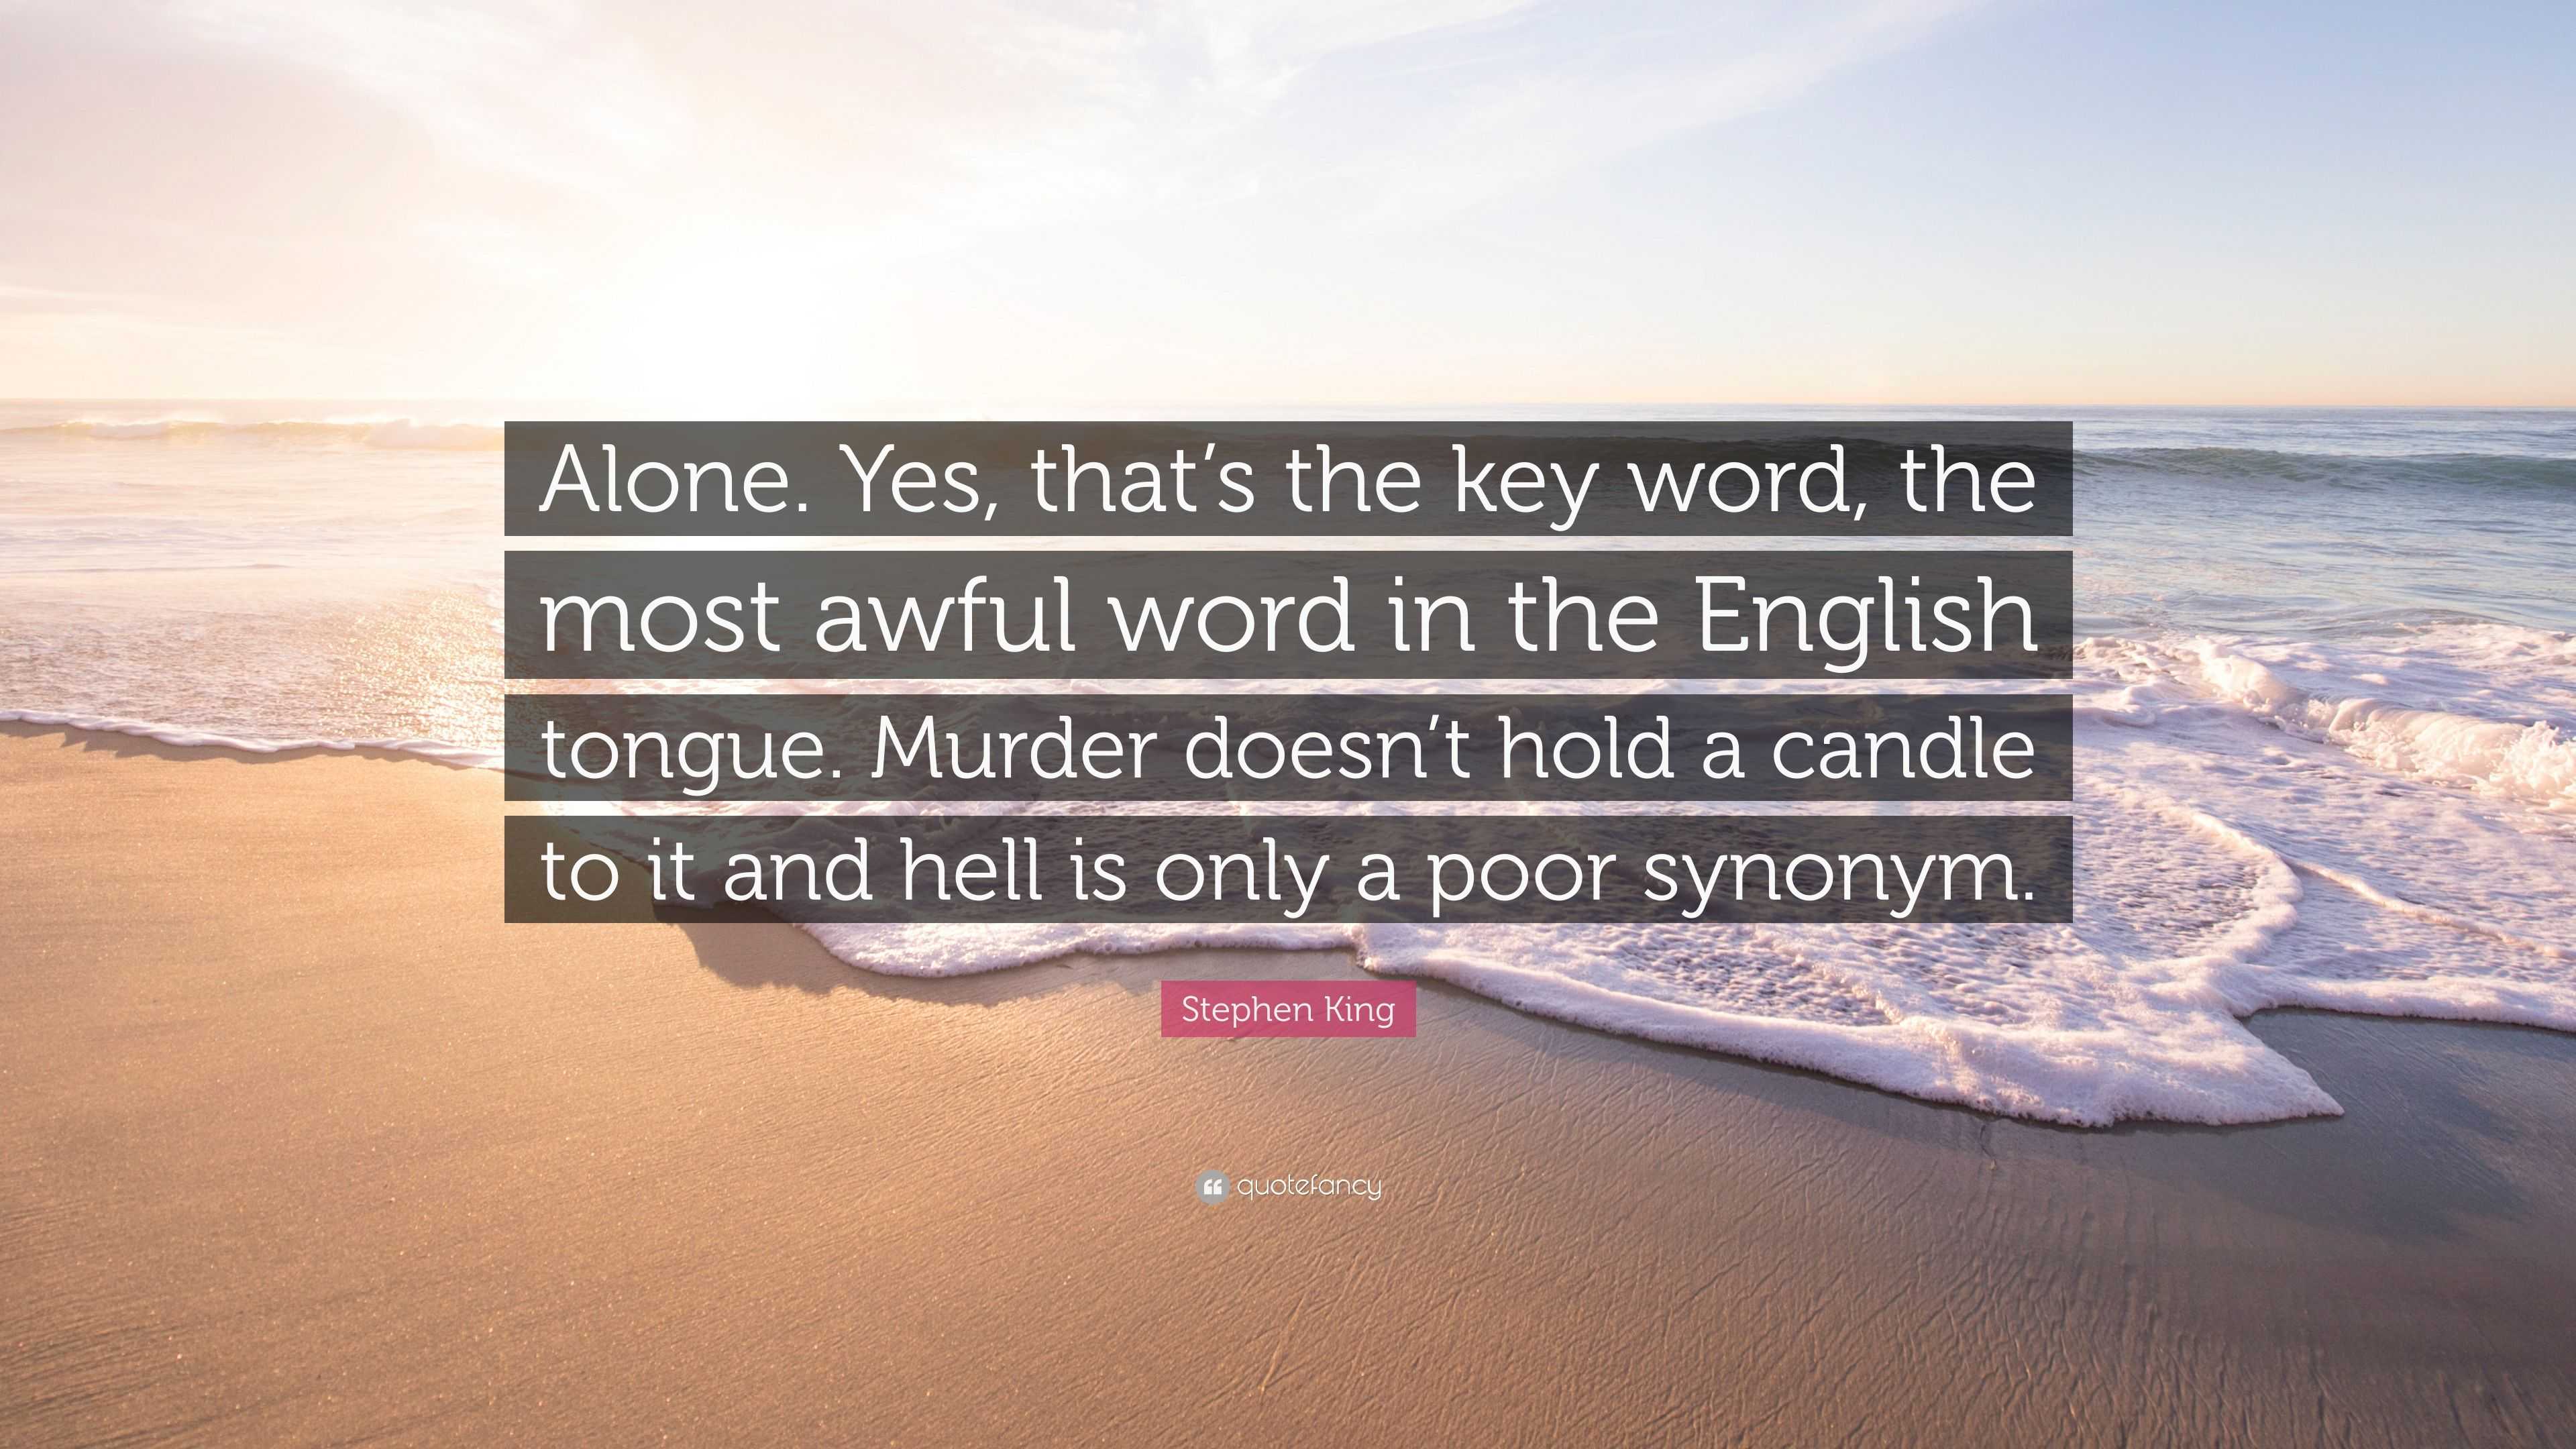 Stephen King quote: Alone. Yes, that's the key word, the most